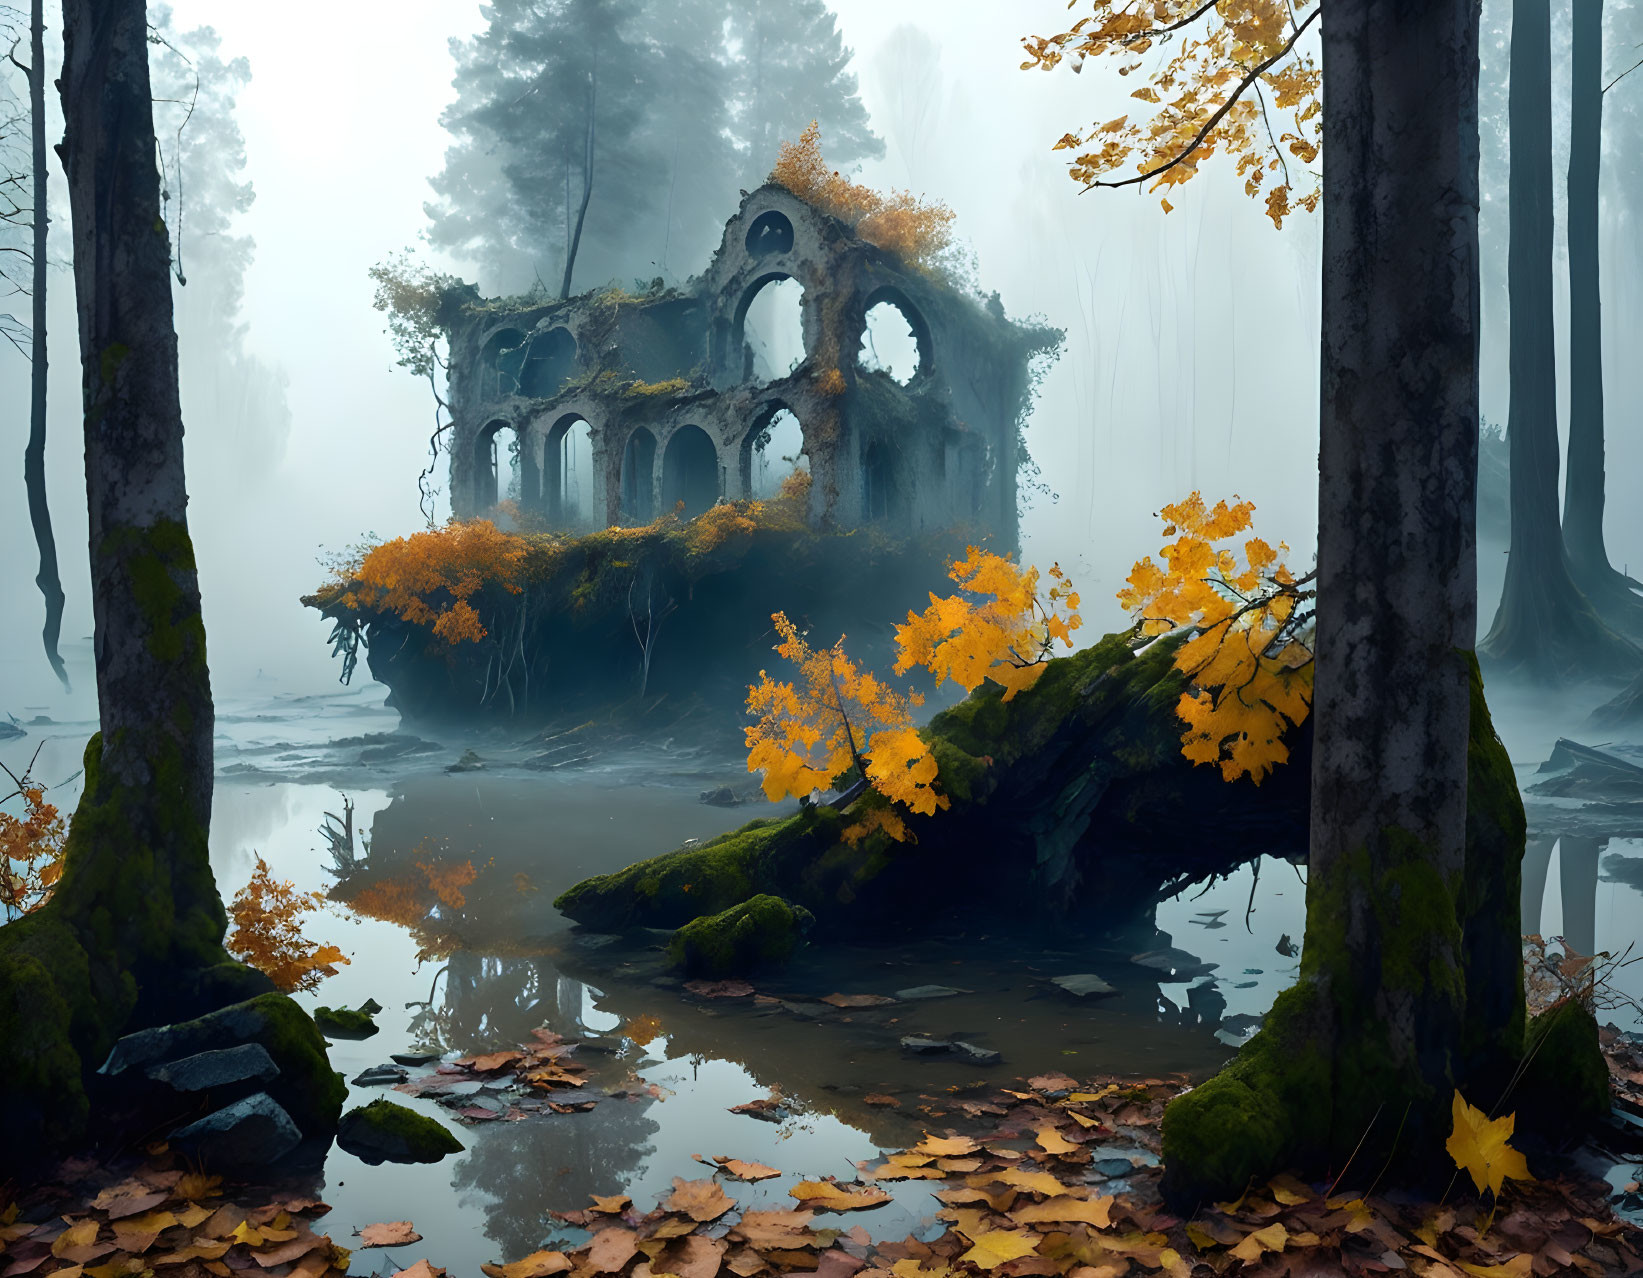 Foggy Autumn Forest with Stone Structure Reflected in Pond